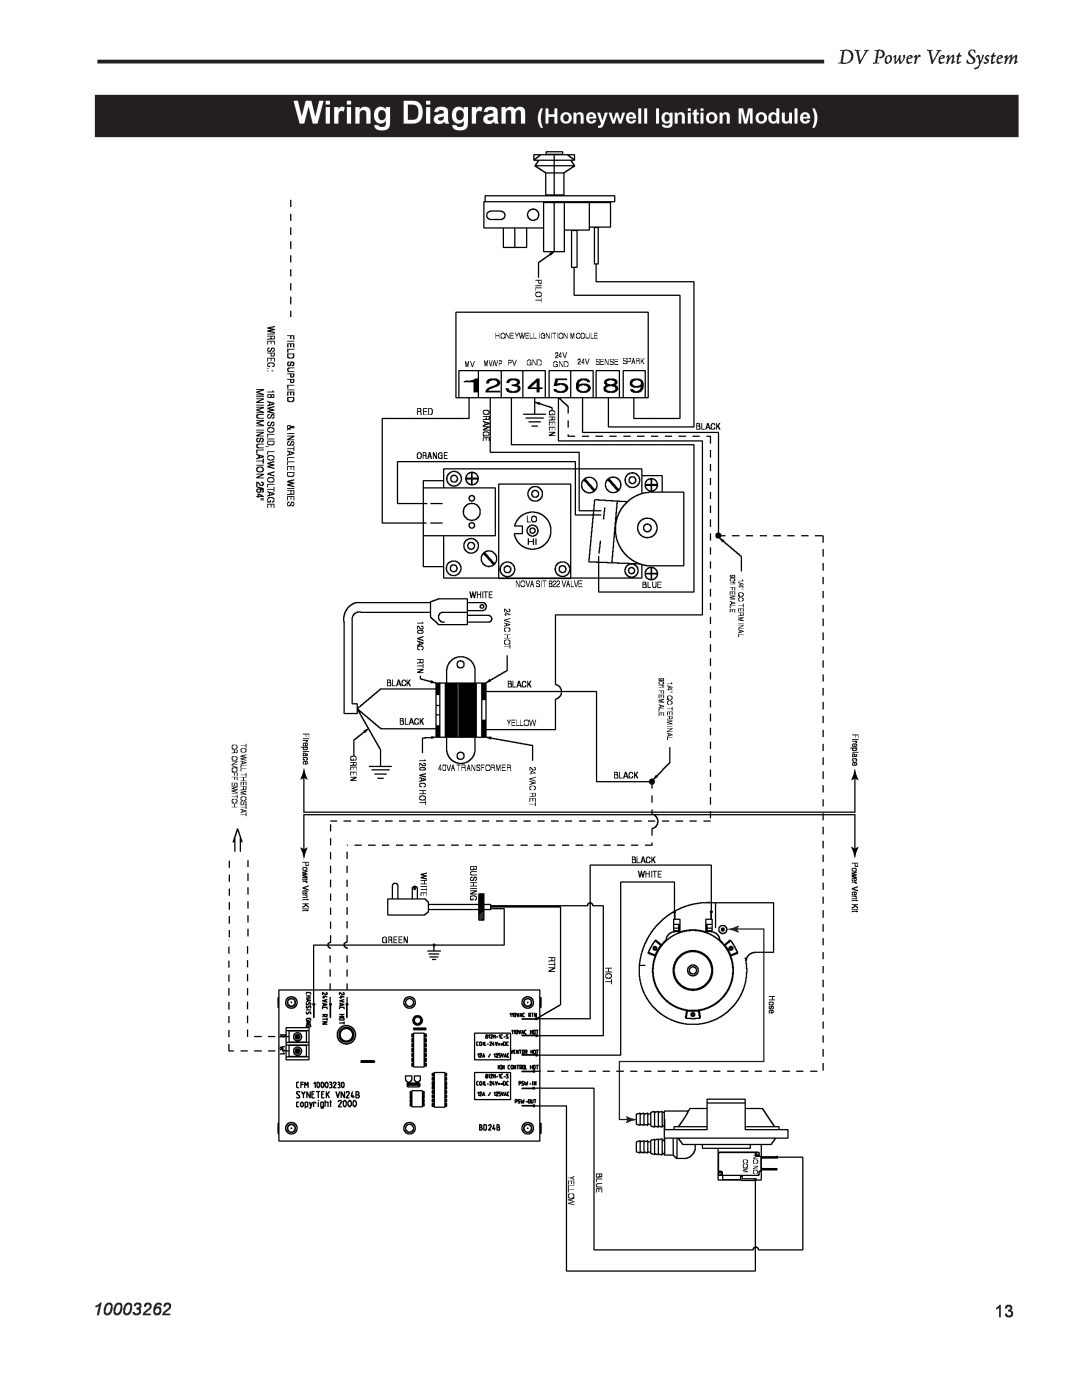 Vermont Casting 7PDVS manual Wiring Diagram Honeywell Ignition Module, DV Power Vent System, 10003262 